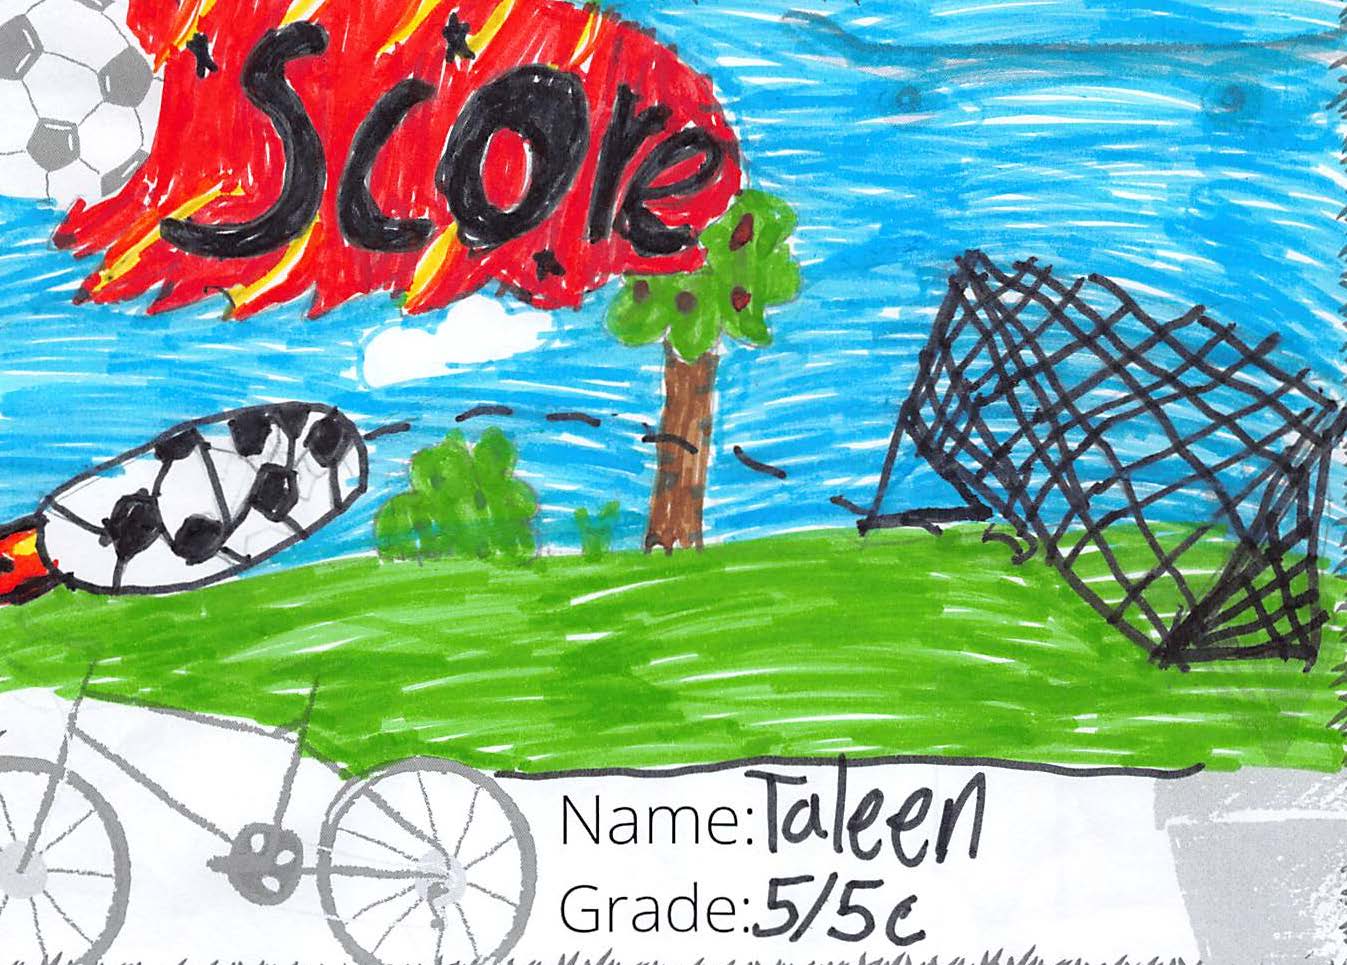 Marker drawing for the SCORE! logo contest. The drawing is colourful and includes a soccer ball being kicked into a net.